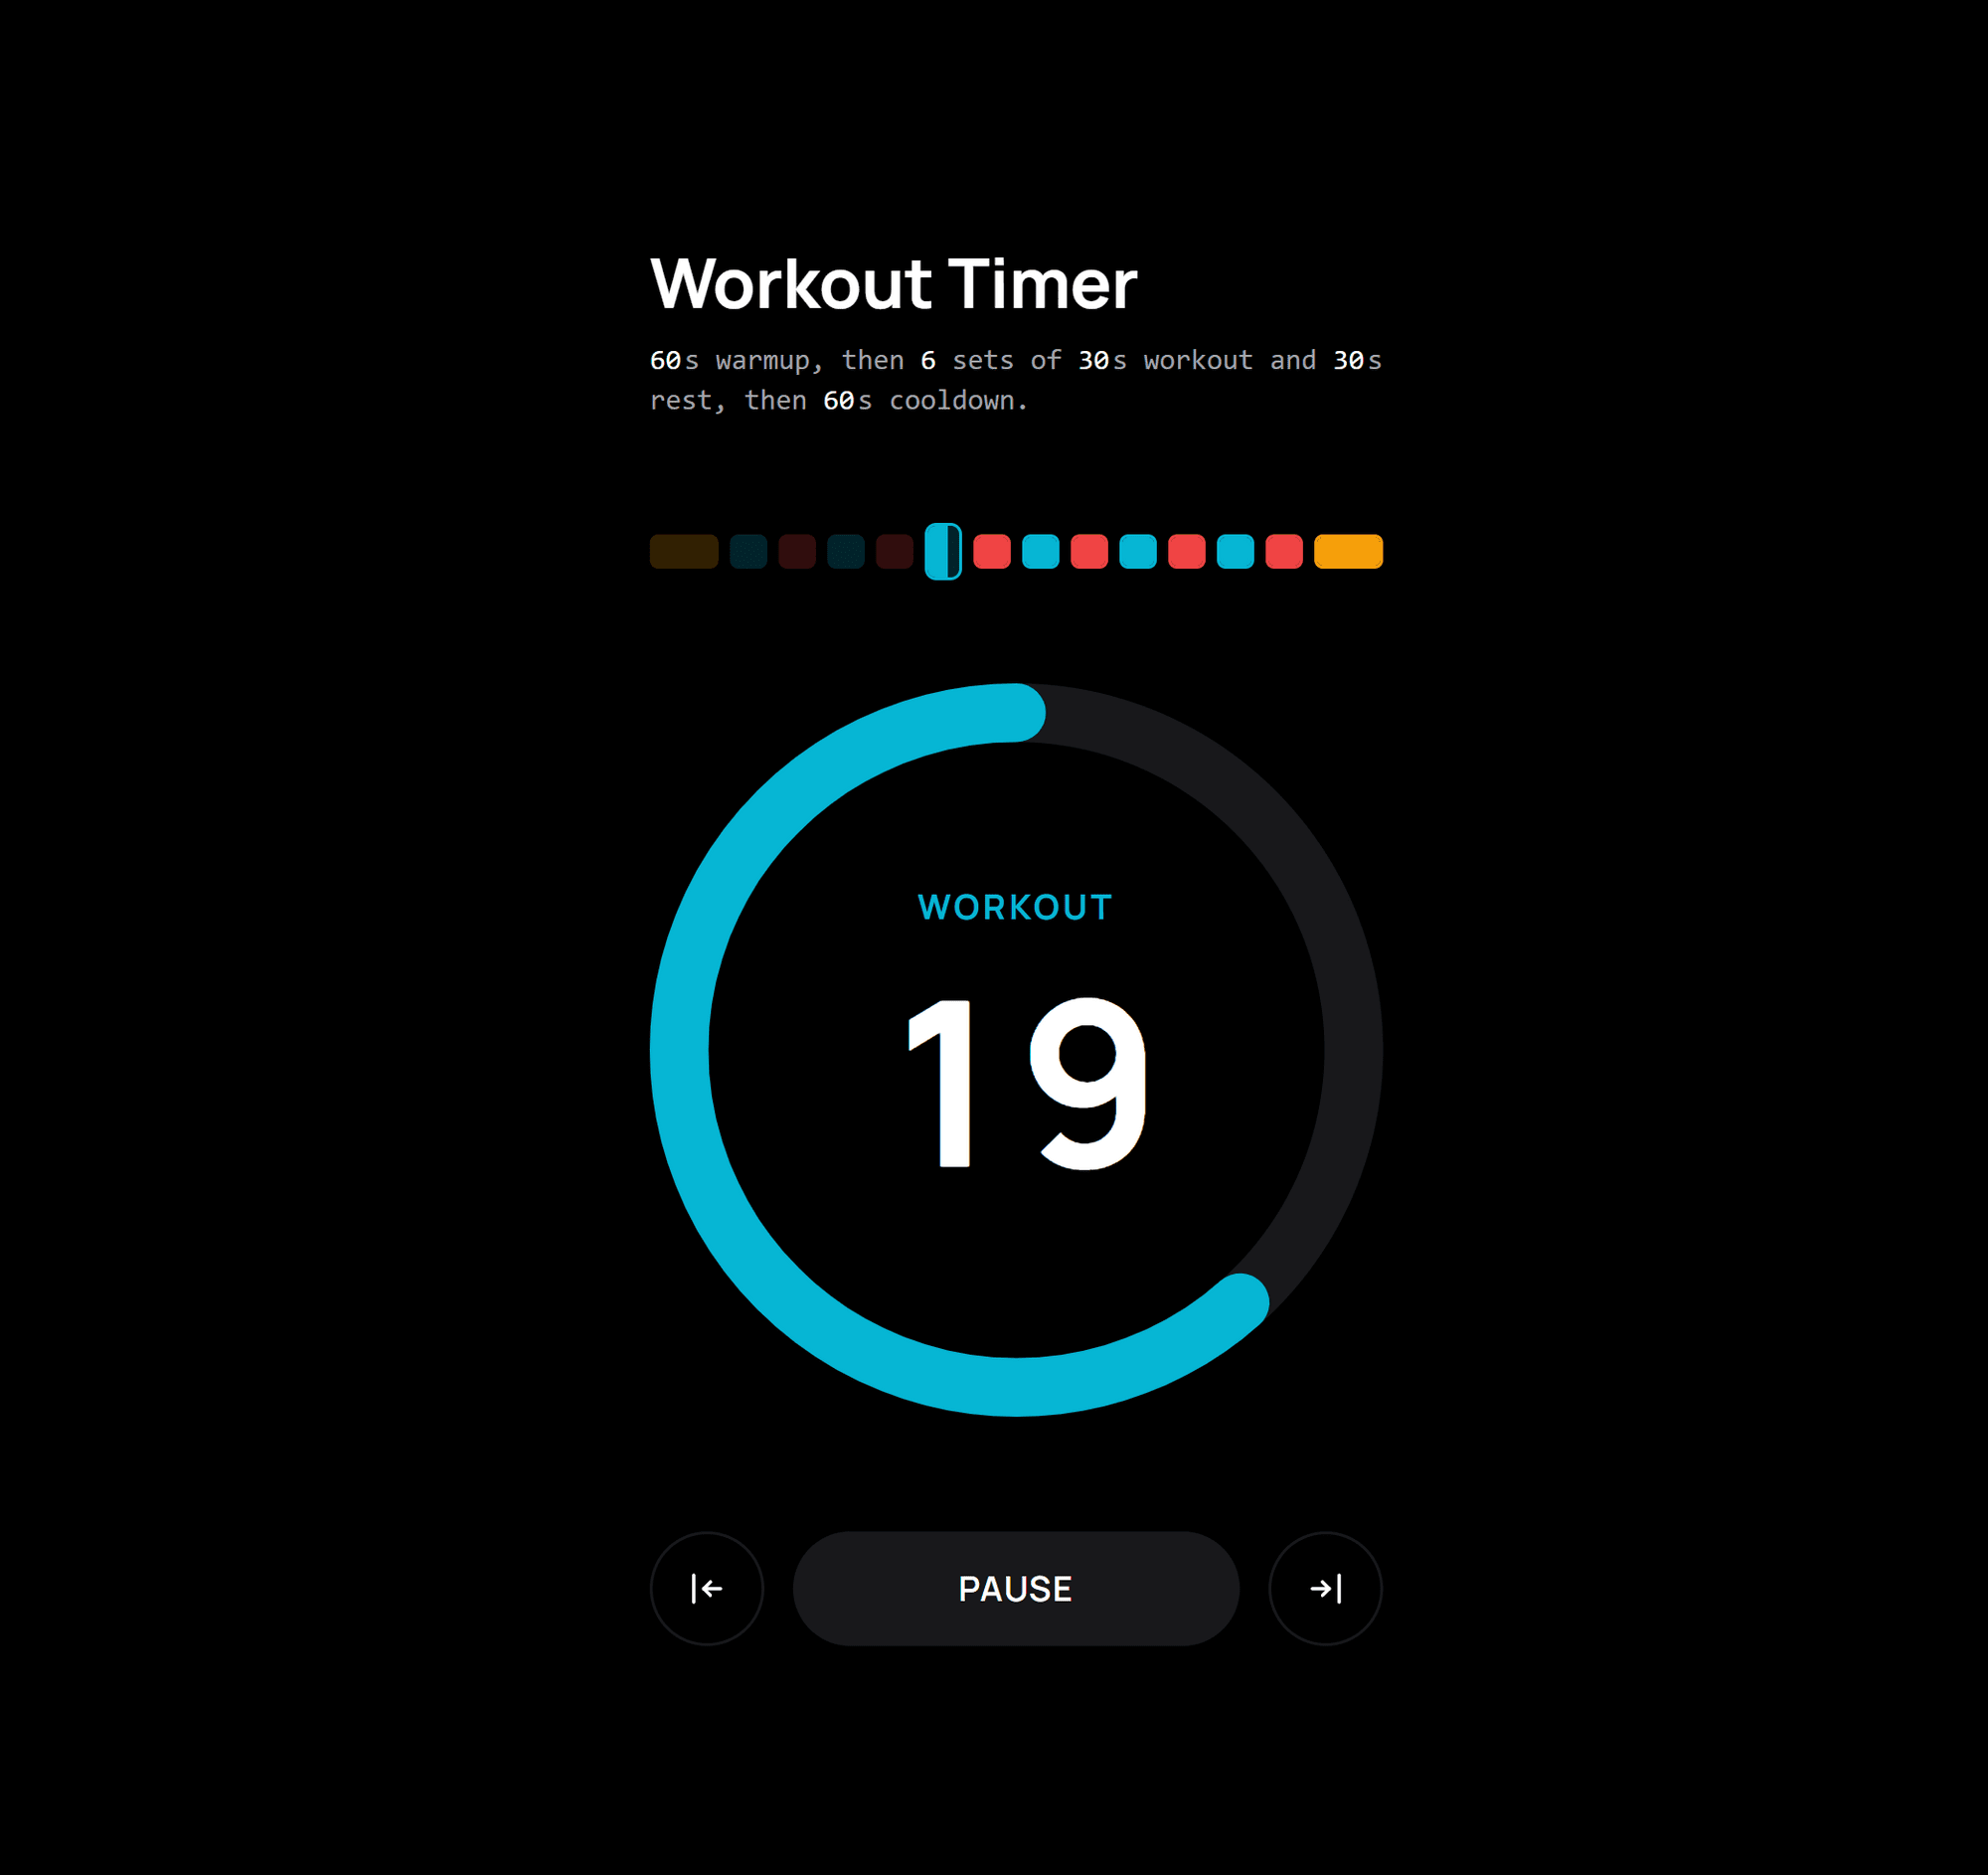 Screenshot/Mock-up of the project: Workout Timer